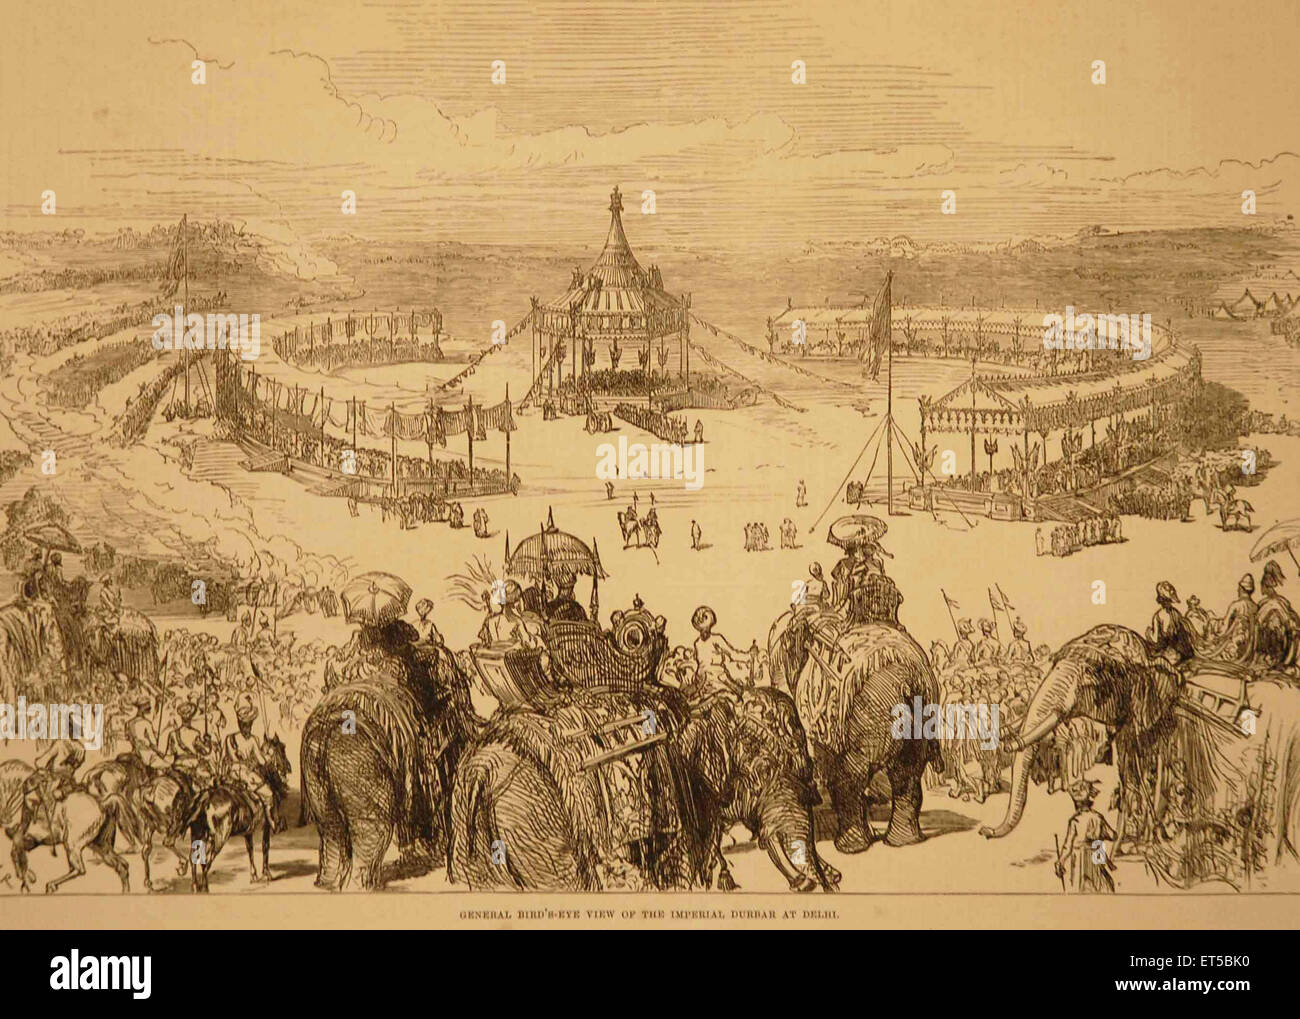 Lithographs  General  Bird's Eye View of the Imperial Durbar at Delhi ; India Stock Photo